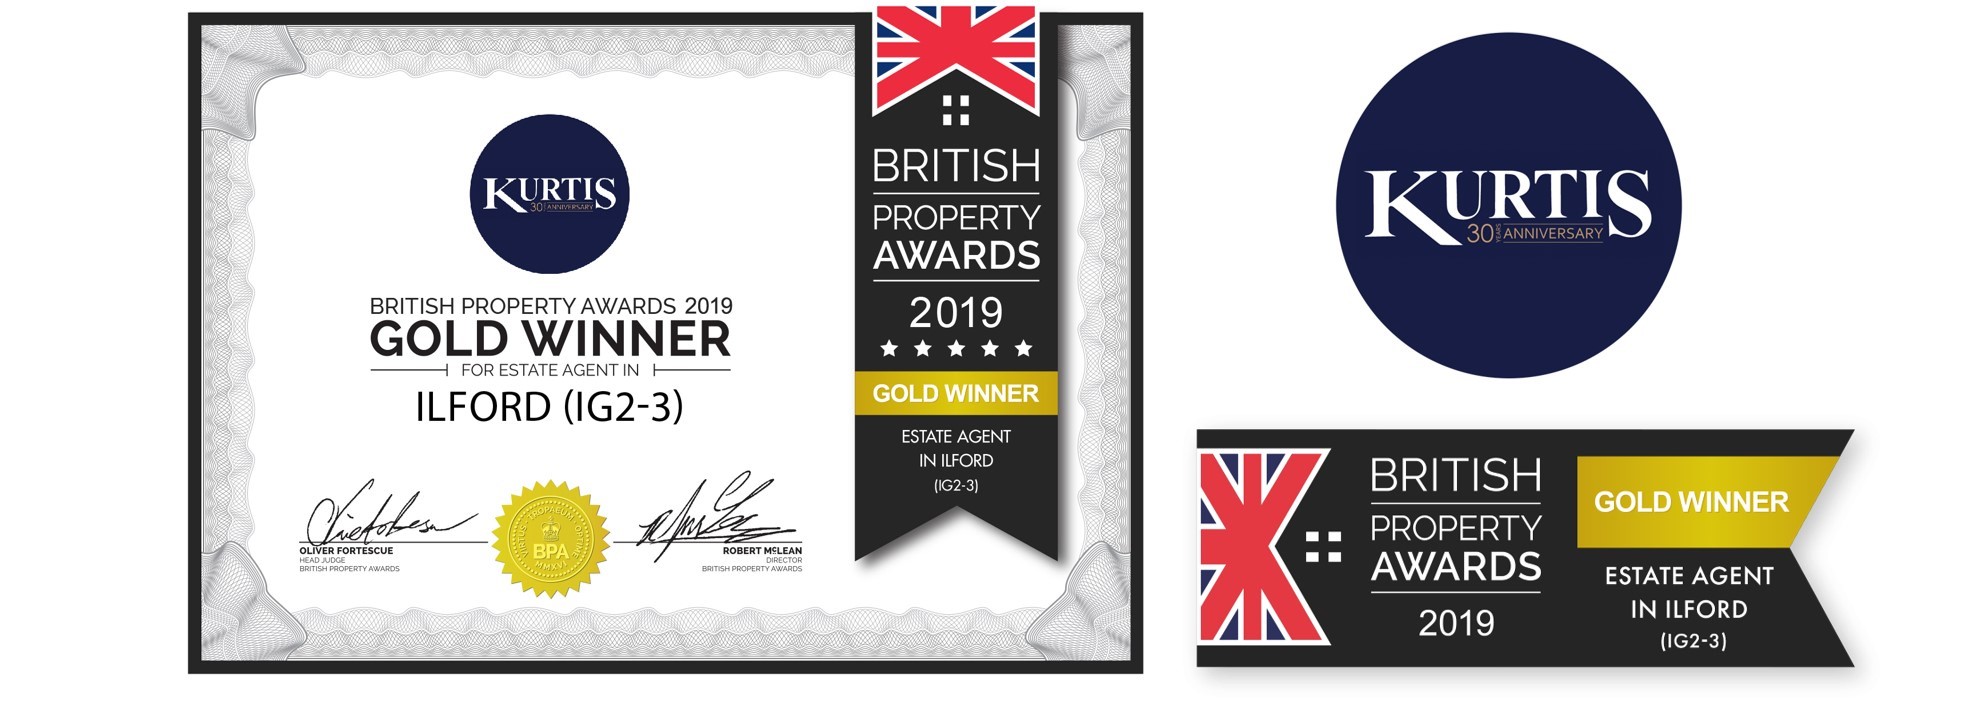 Kurtis Property have been presented with a Gold Award as the best estate agent in Ilford & Goodmayes (IG2 & IG3) by the British Property Awards 2019.